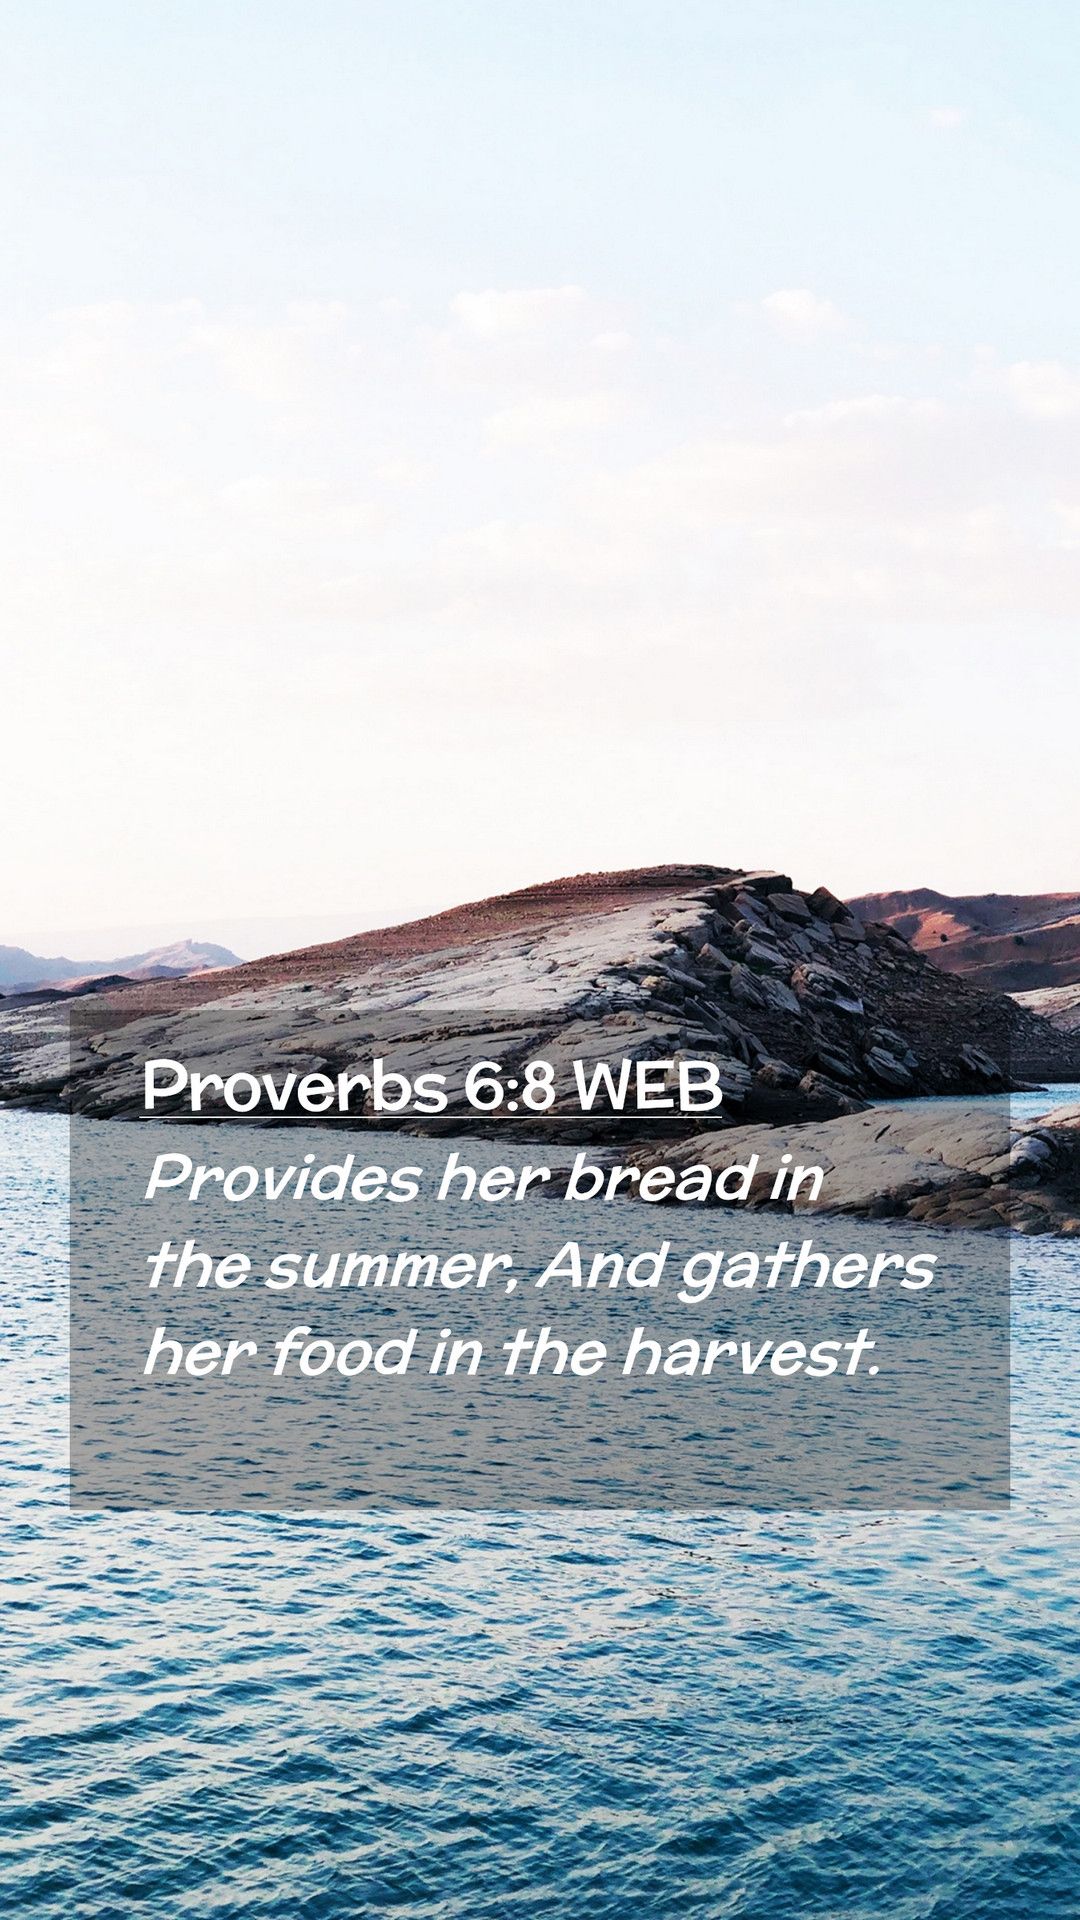 Proverbs 6:8 WEB Mobile Phone Wallpaper her bread in the summer, And gathers her